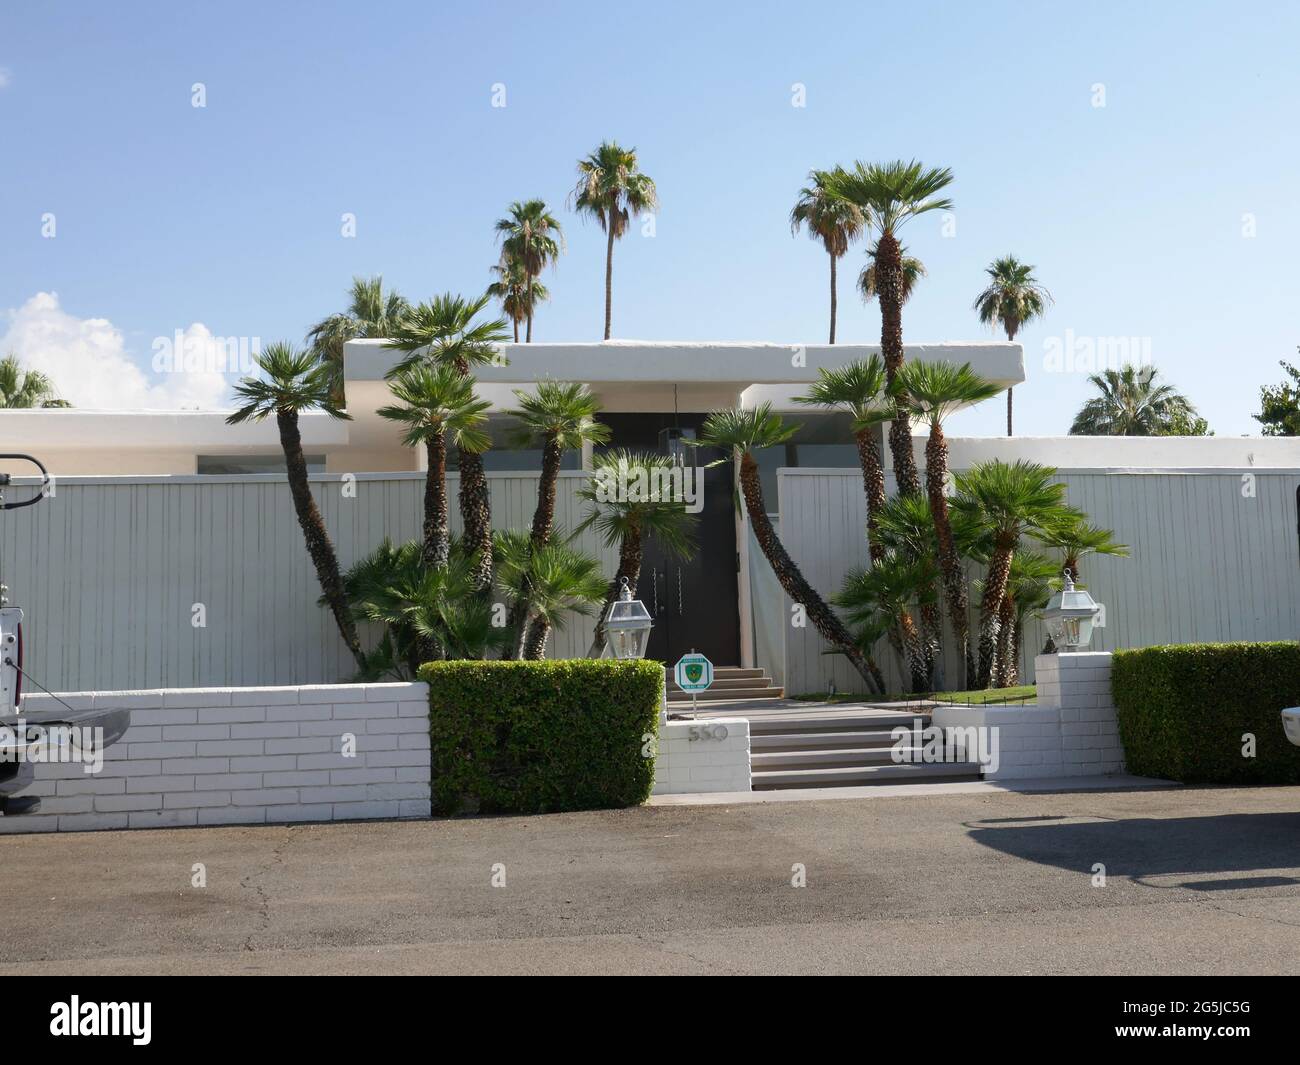 Palm Springs, California, USA 24th June 2021 A general view of atmosphere of actress Goldie Hawn and actor Kurt Russell's former home/house at 550 Via Lola on June 24, 2021 in Palm Springs, California, USA. Photo by Barry King/Alamy Stock Photo Stock Photo